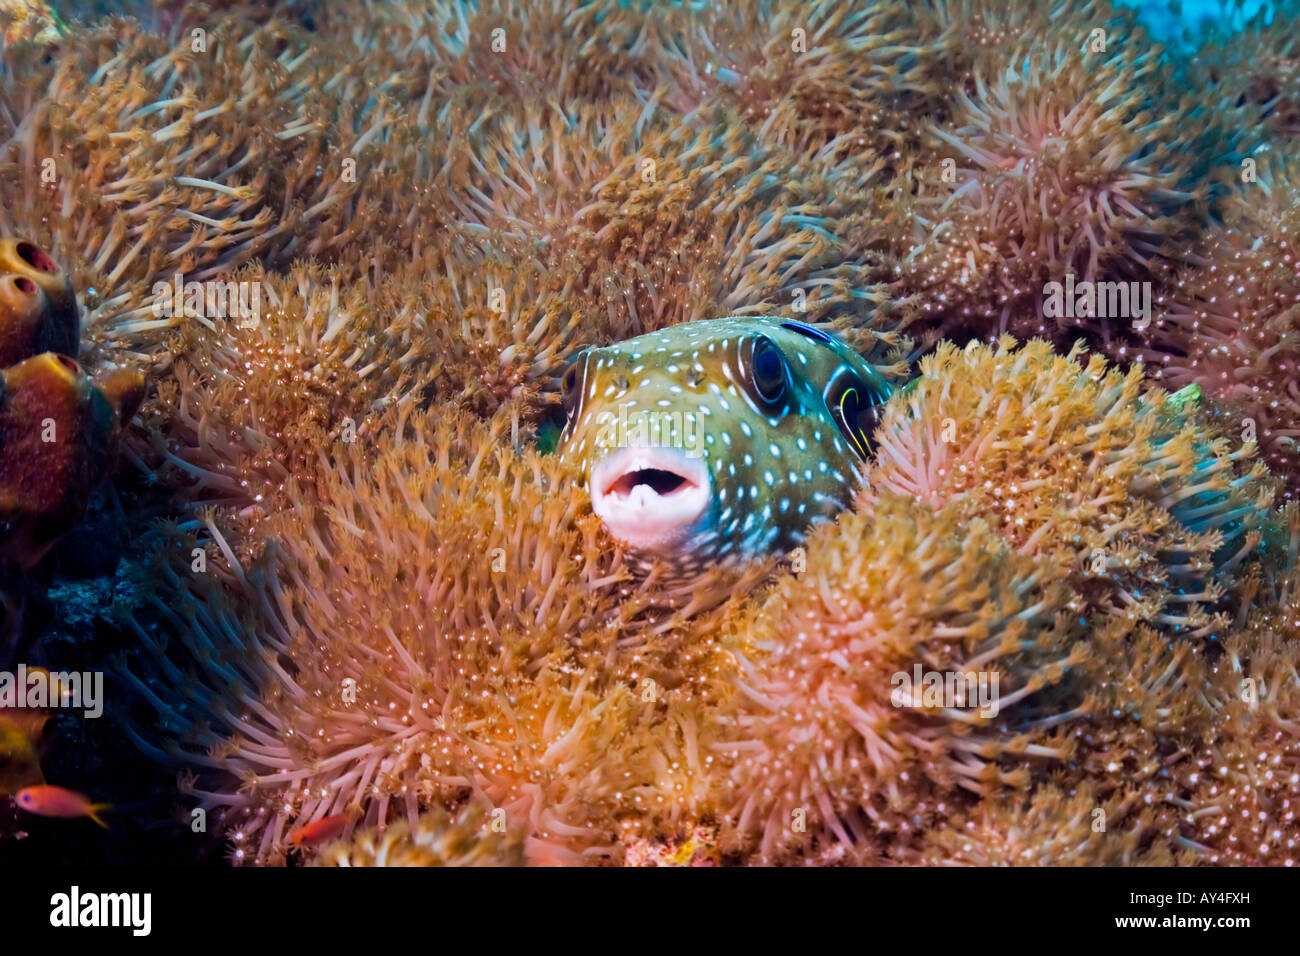 The Whitespotted Puffer Fish nestles amid the corals at her home near Sipadan Island in the Celebes Sea, Malaysia. Stock Photo